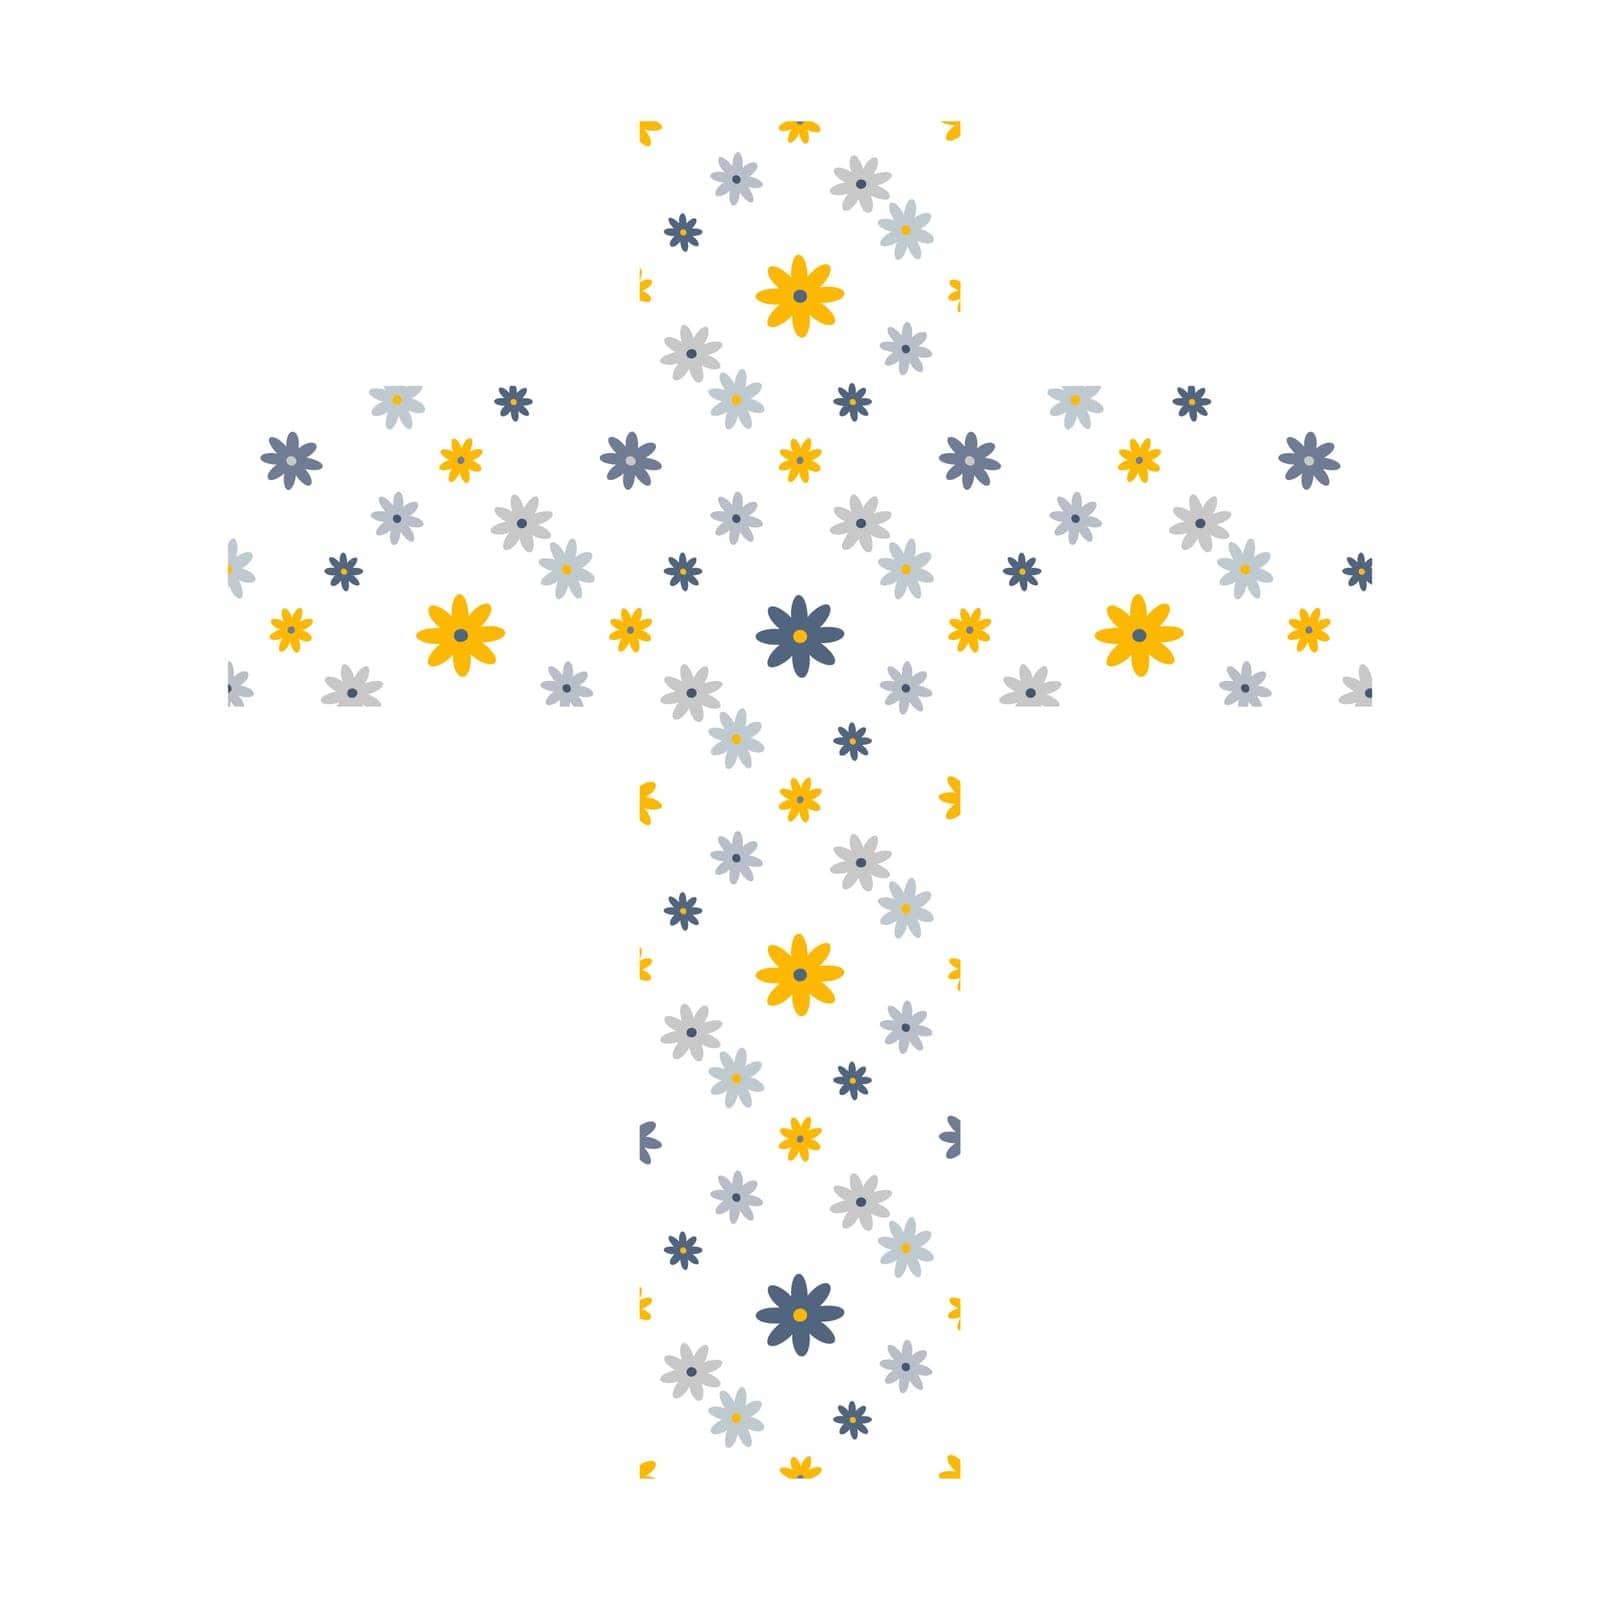 cross with spring flowers in minimalistic style by Dustick